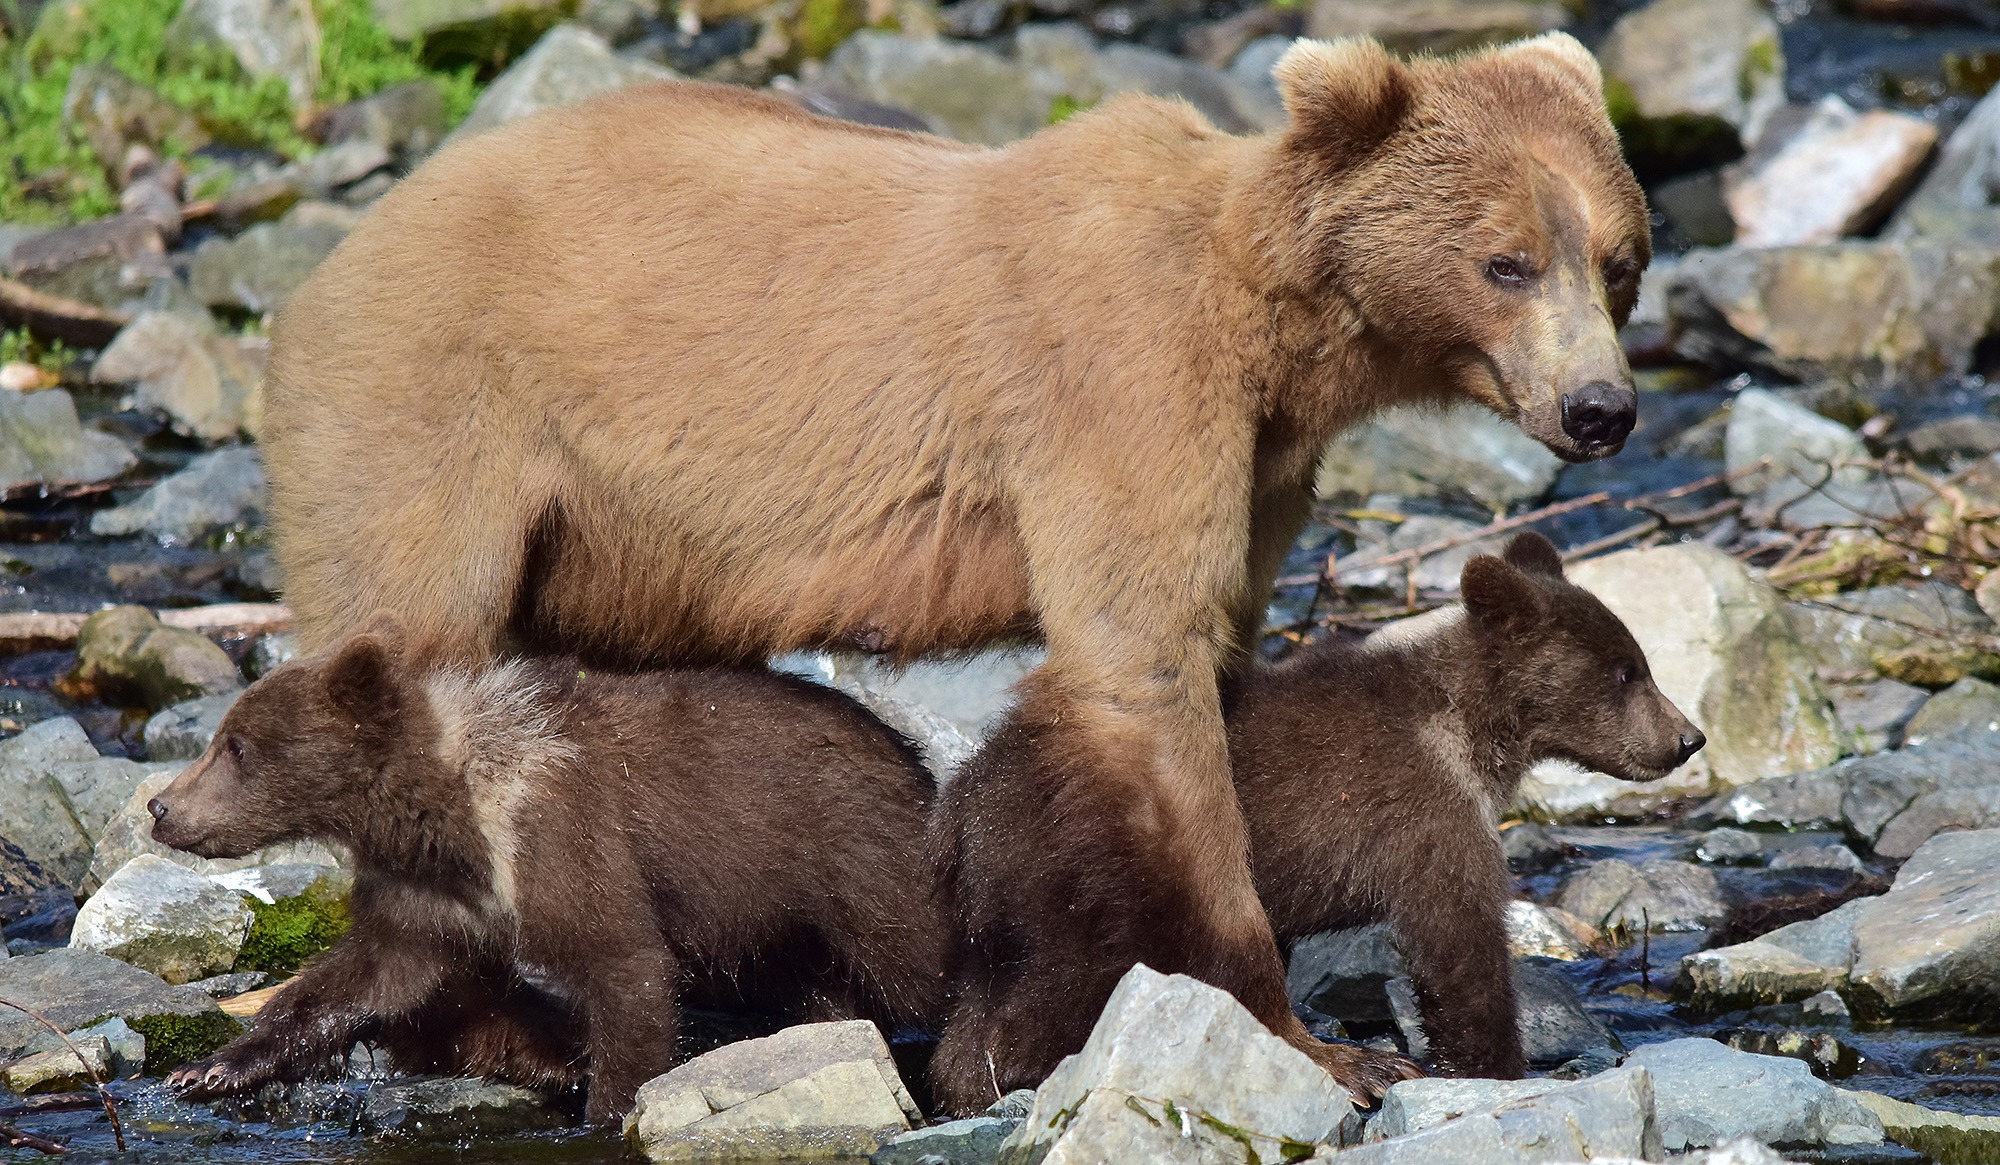 See brown bear sows and cubs on our Alaska brown bear viewing tour.